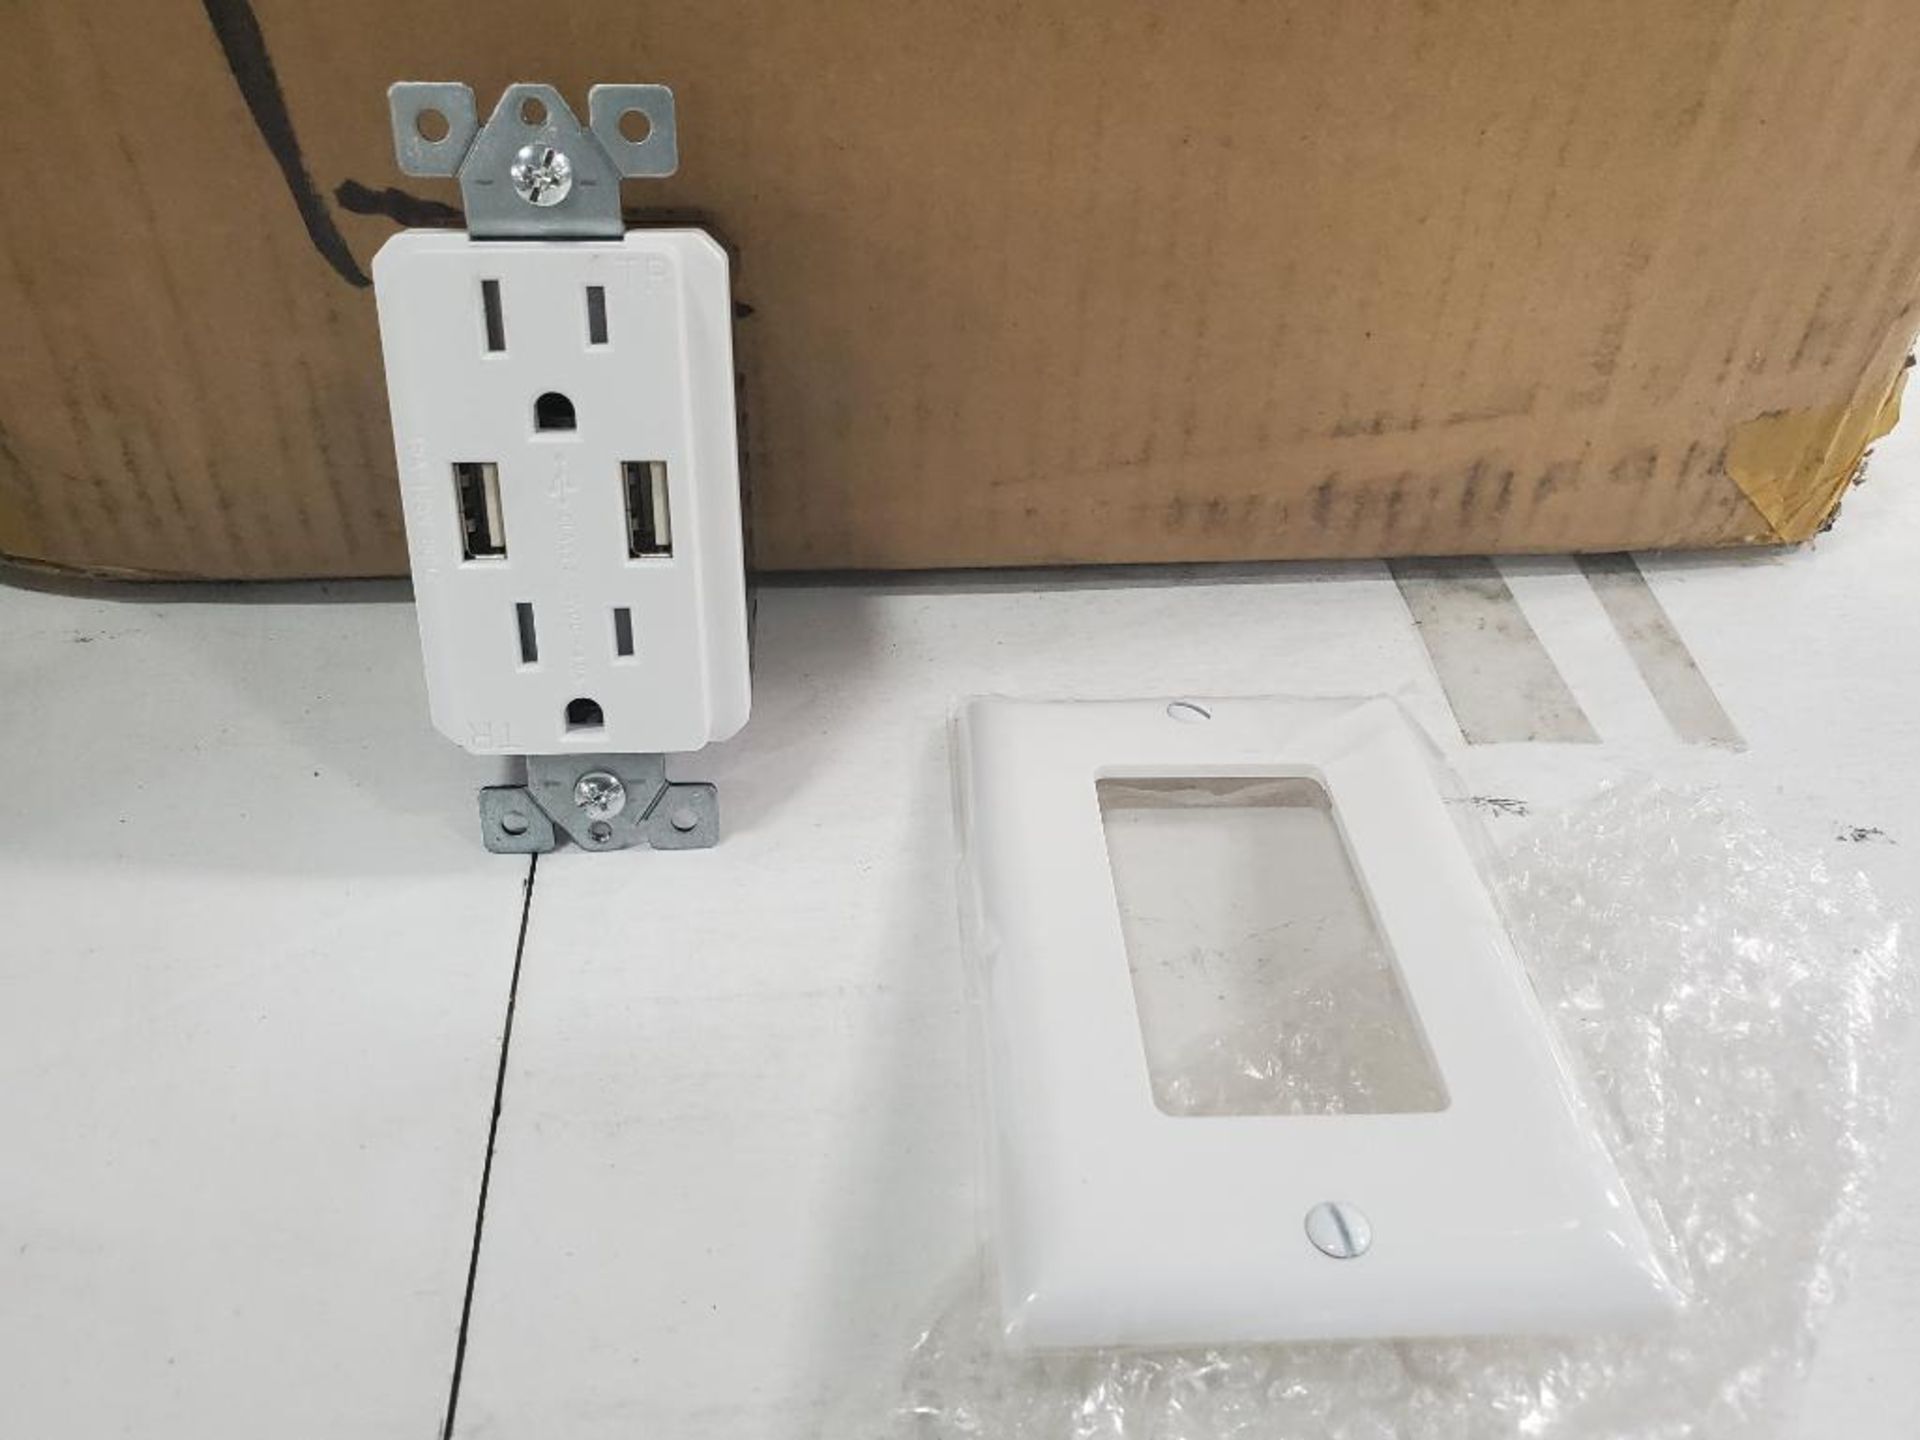 Qty 120 - Magnadyne WC-501W USB / dual AC wall mount outlet. New in box.